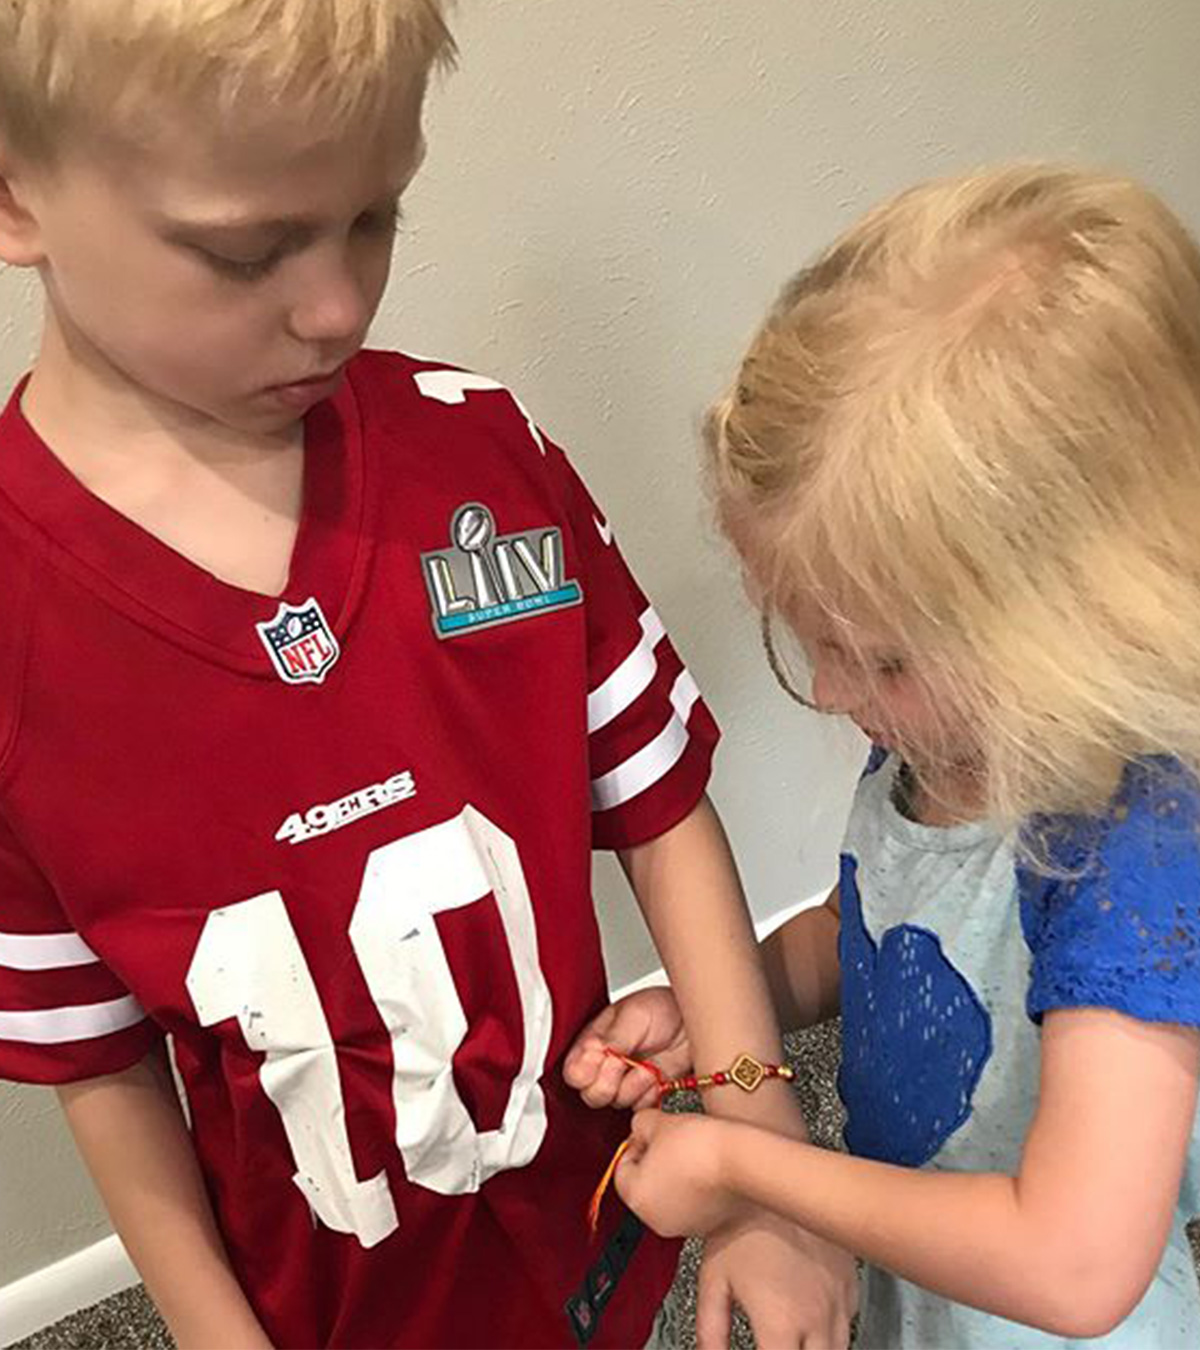 America’s Bravest 6-Year-Old Gets A Rakhi From Younger Sister